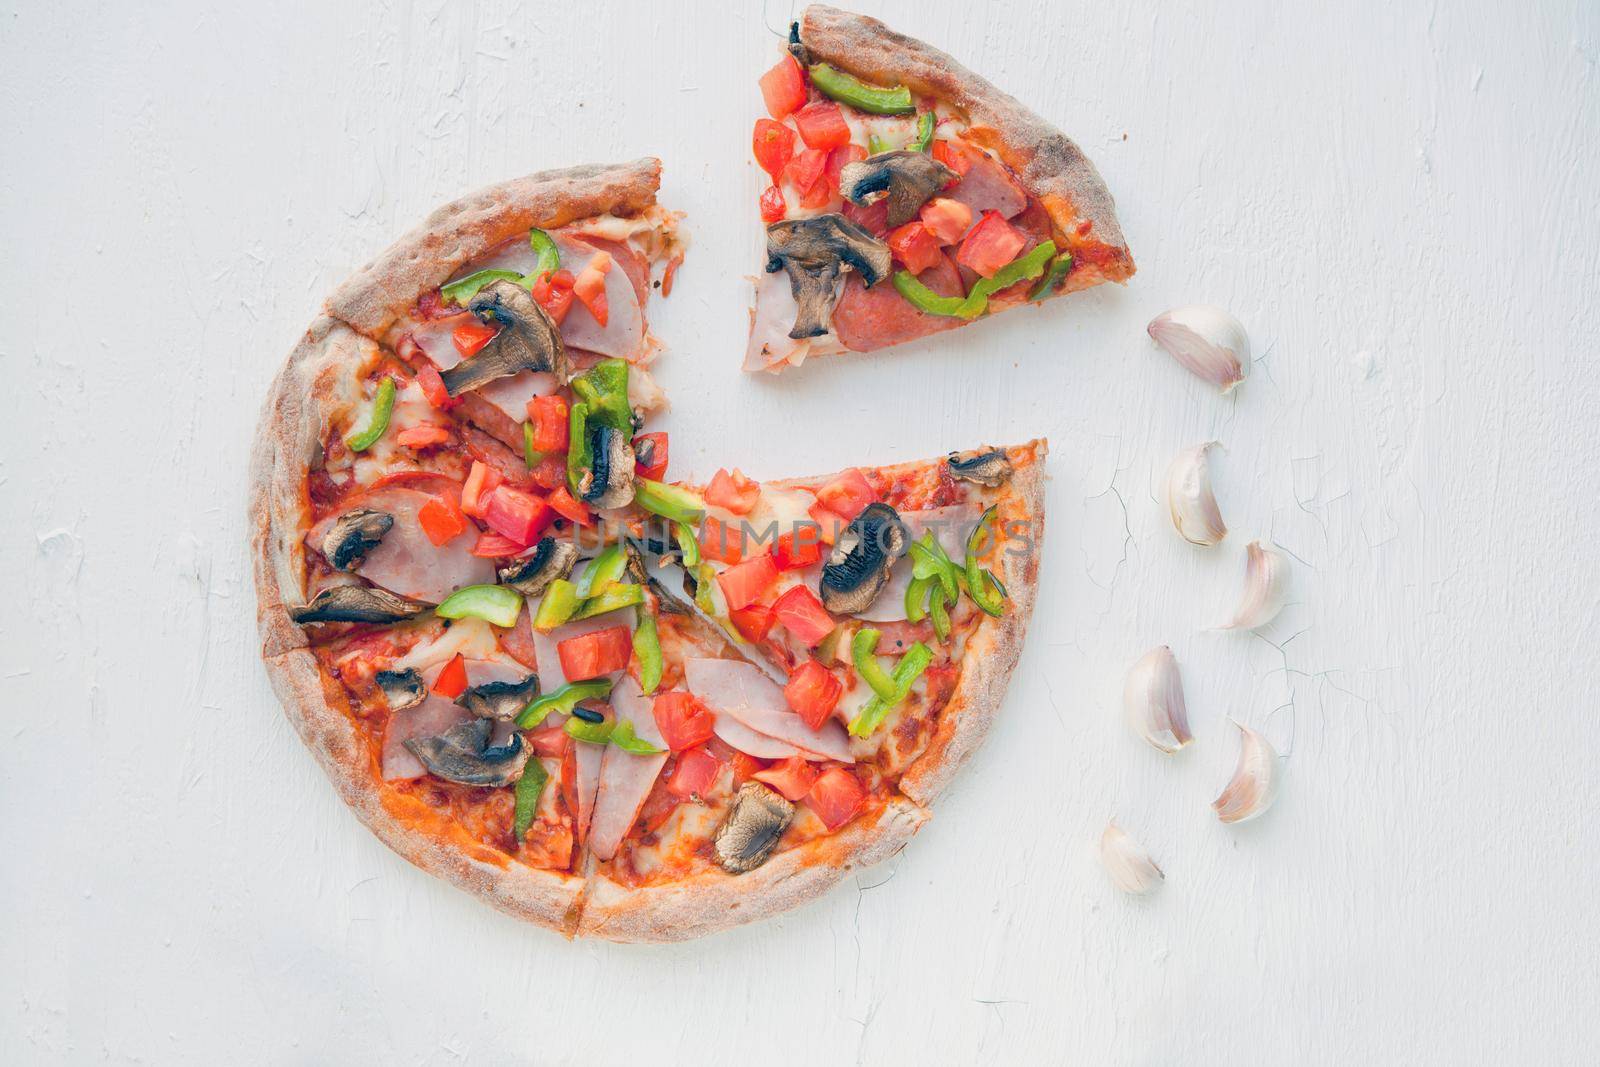 Top view of Italian Pizza on white table with mushrooms, tomato, olives and cheese. Look as Prosciutto, Capricciosa, PIZZA with decoration. Photo with space for text.